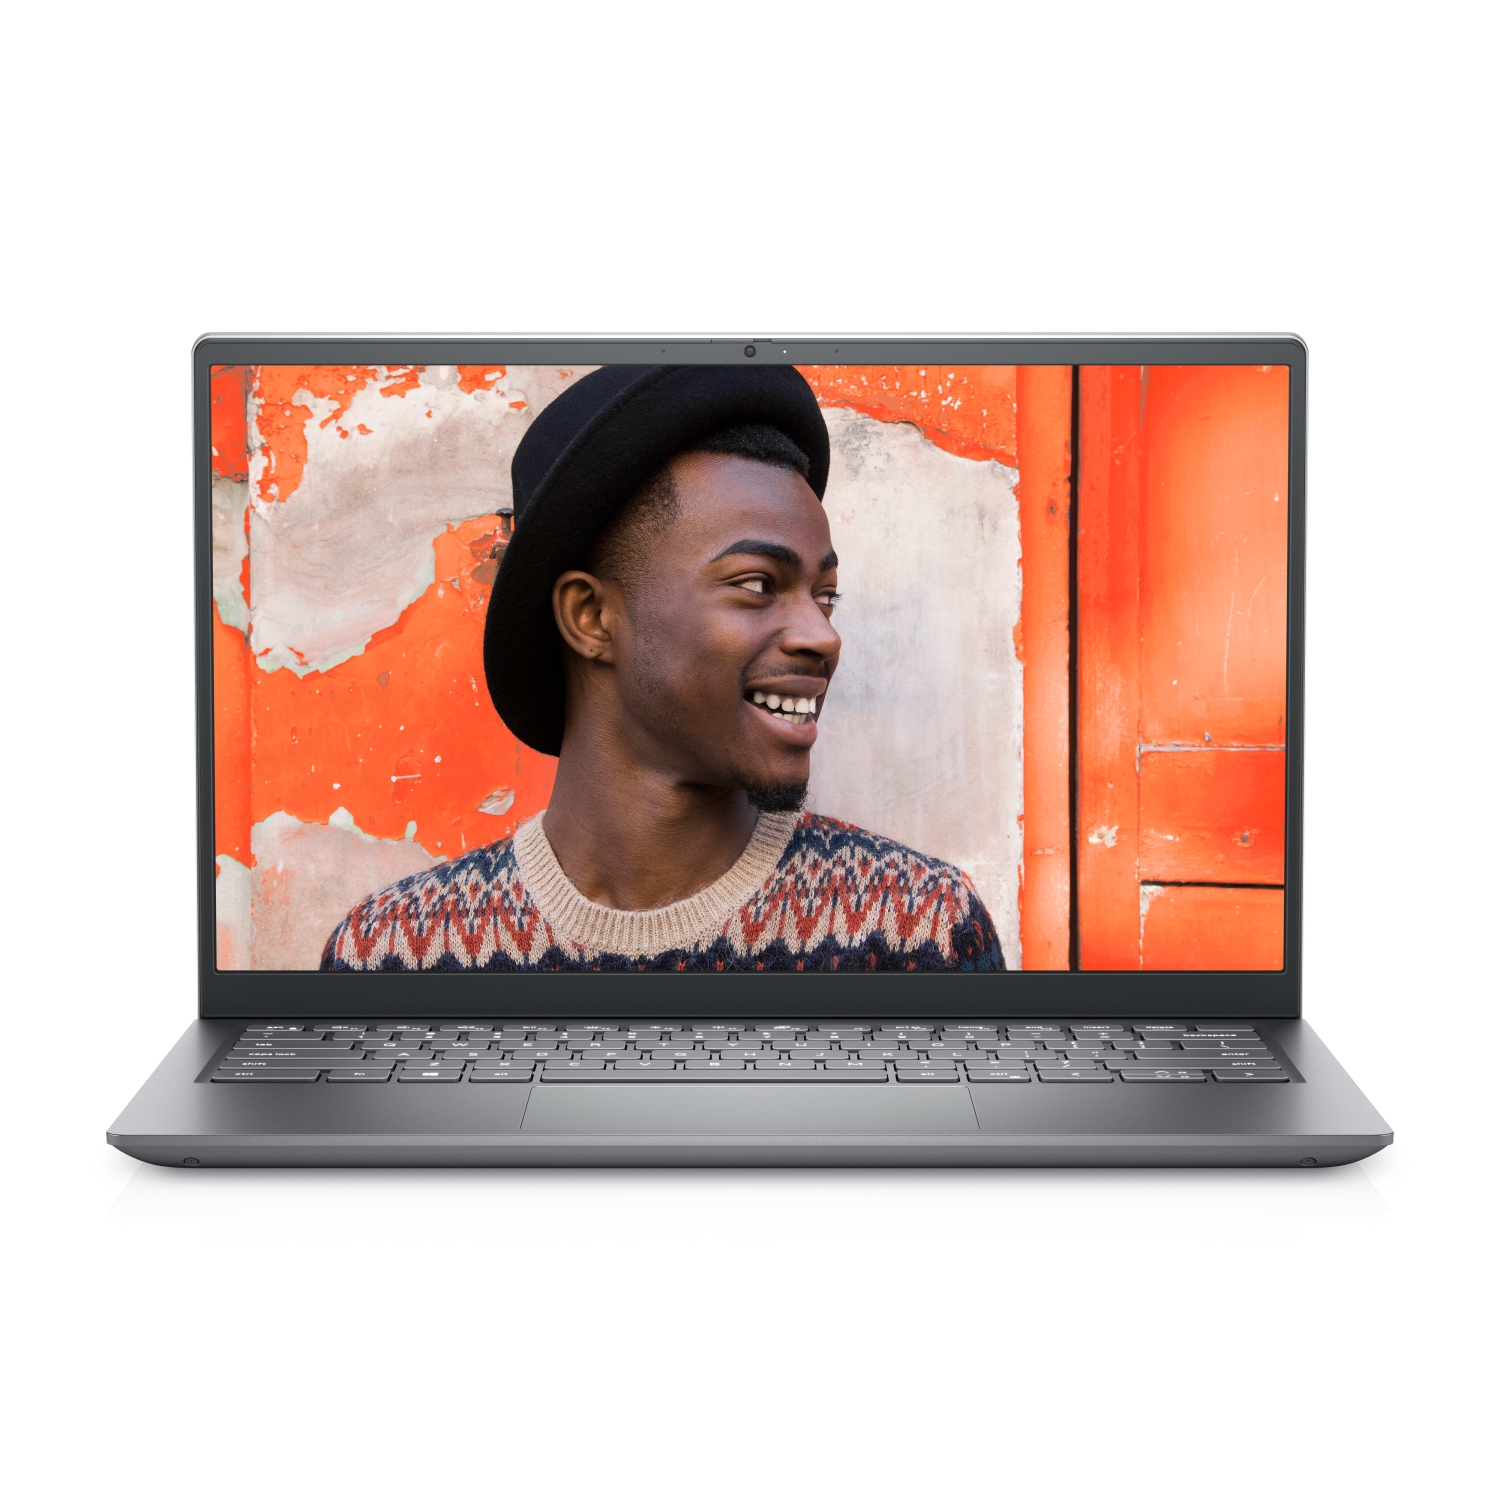 Refurbished (Excellent) – Dell Inspiron 5410 Laptop (2021) | 14" FHD | Core i7 - 128GB SSD - 4GB RAM | 4 Cores @ 4.8 GHz - 11th Gen CPU